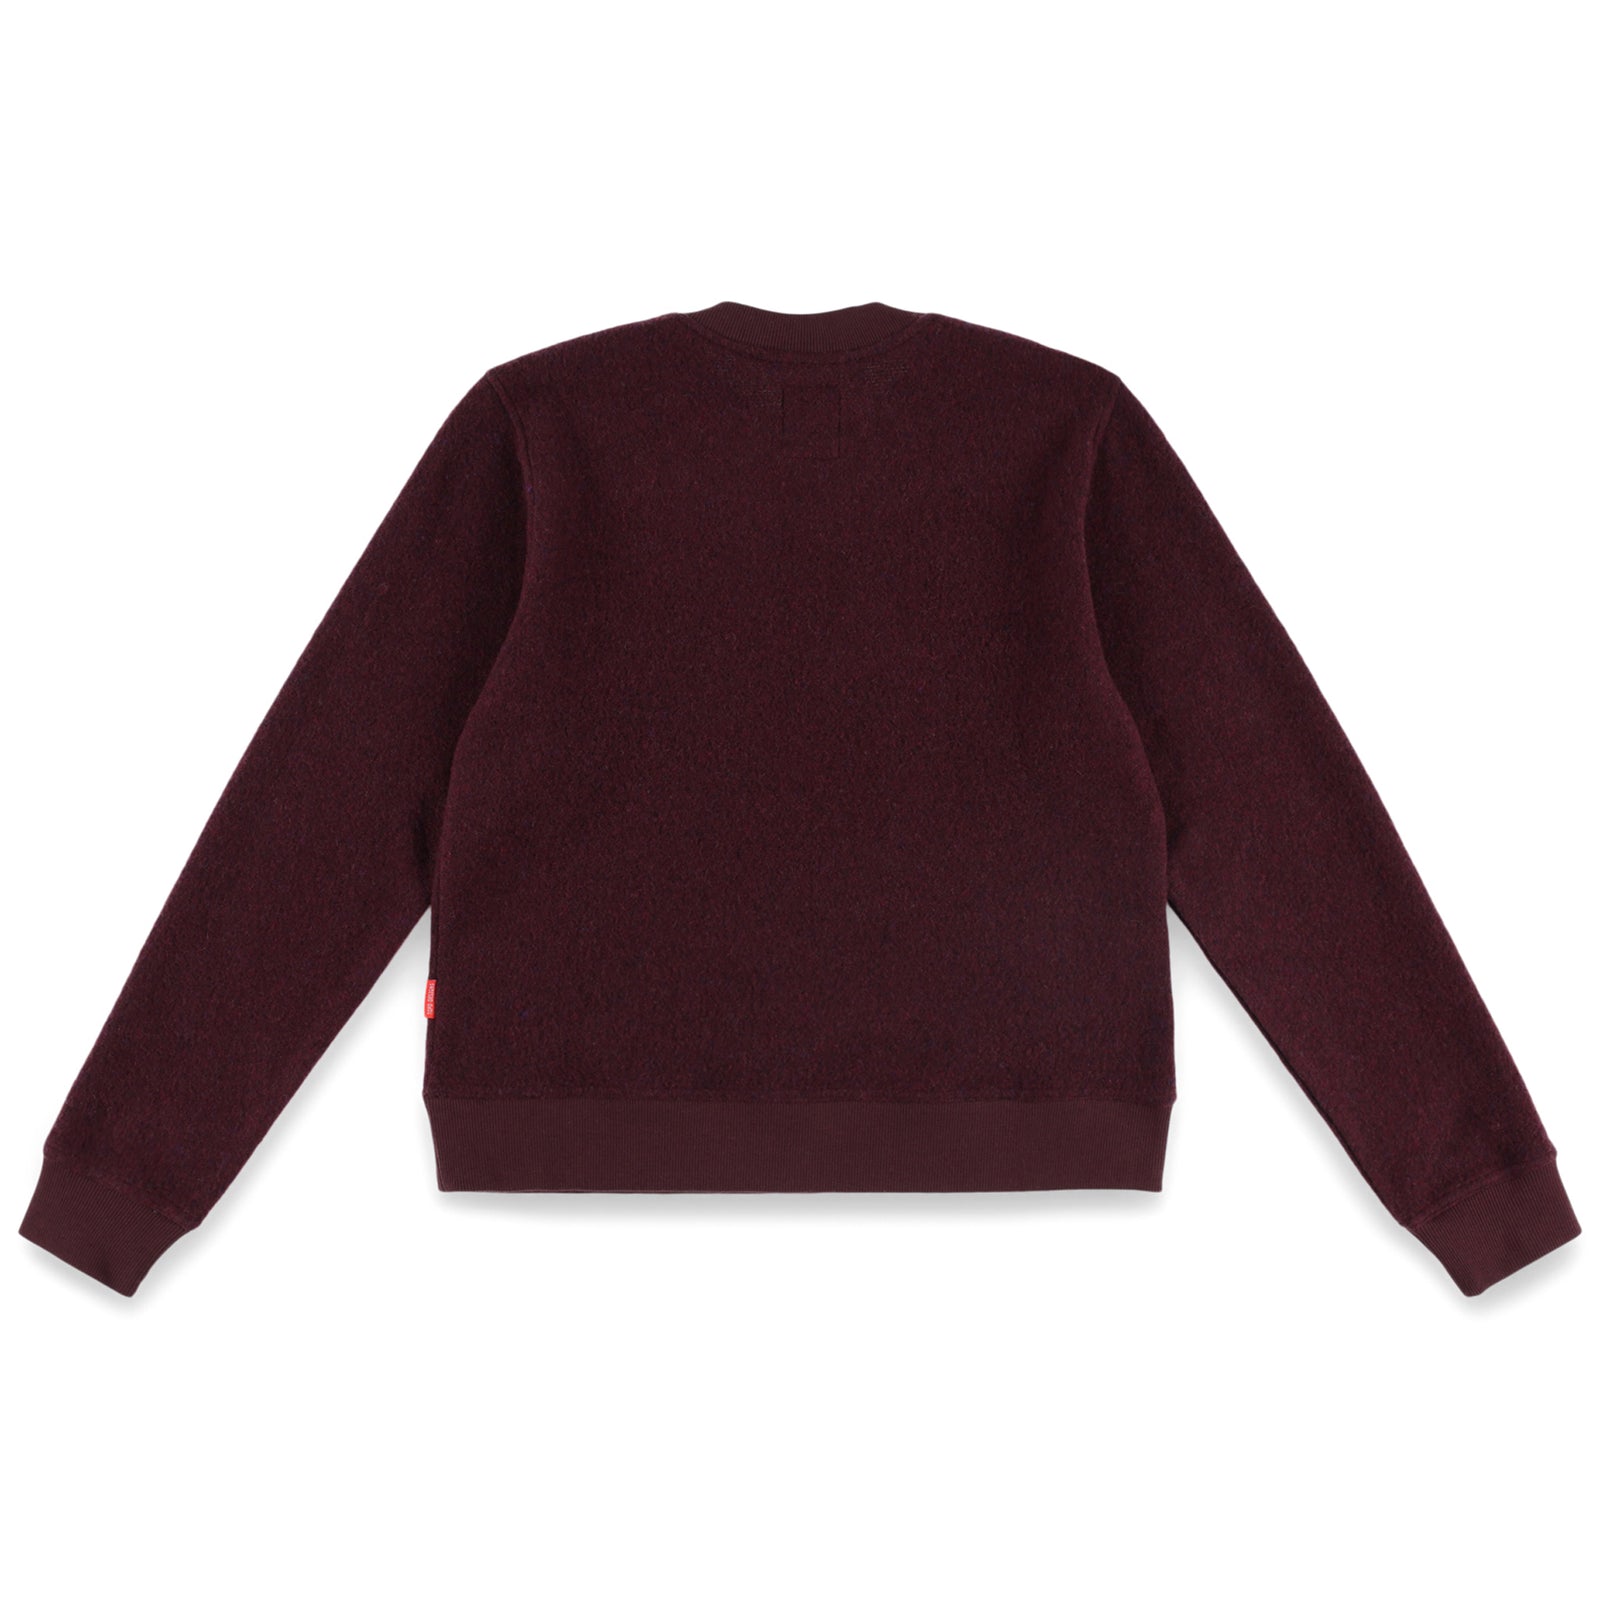 Back of Topo Designs Women's Global Sweater recycled Italian wool crewneck pullover in "Burgundy" red